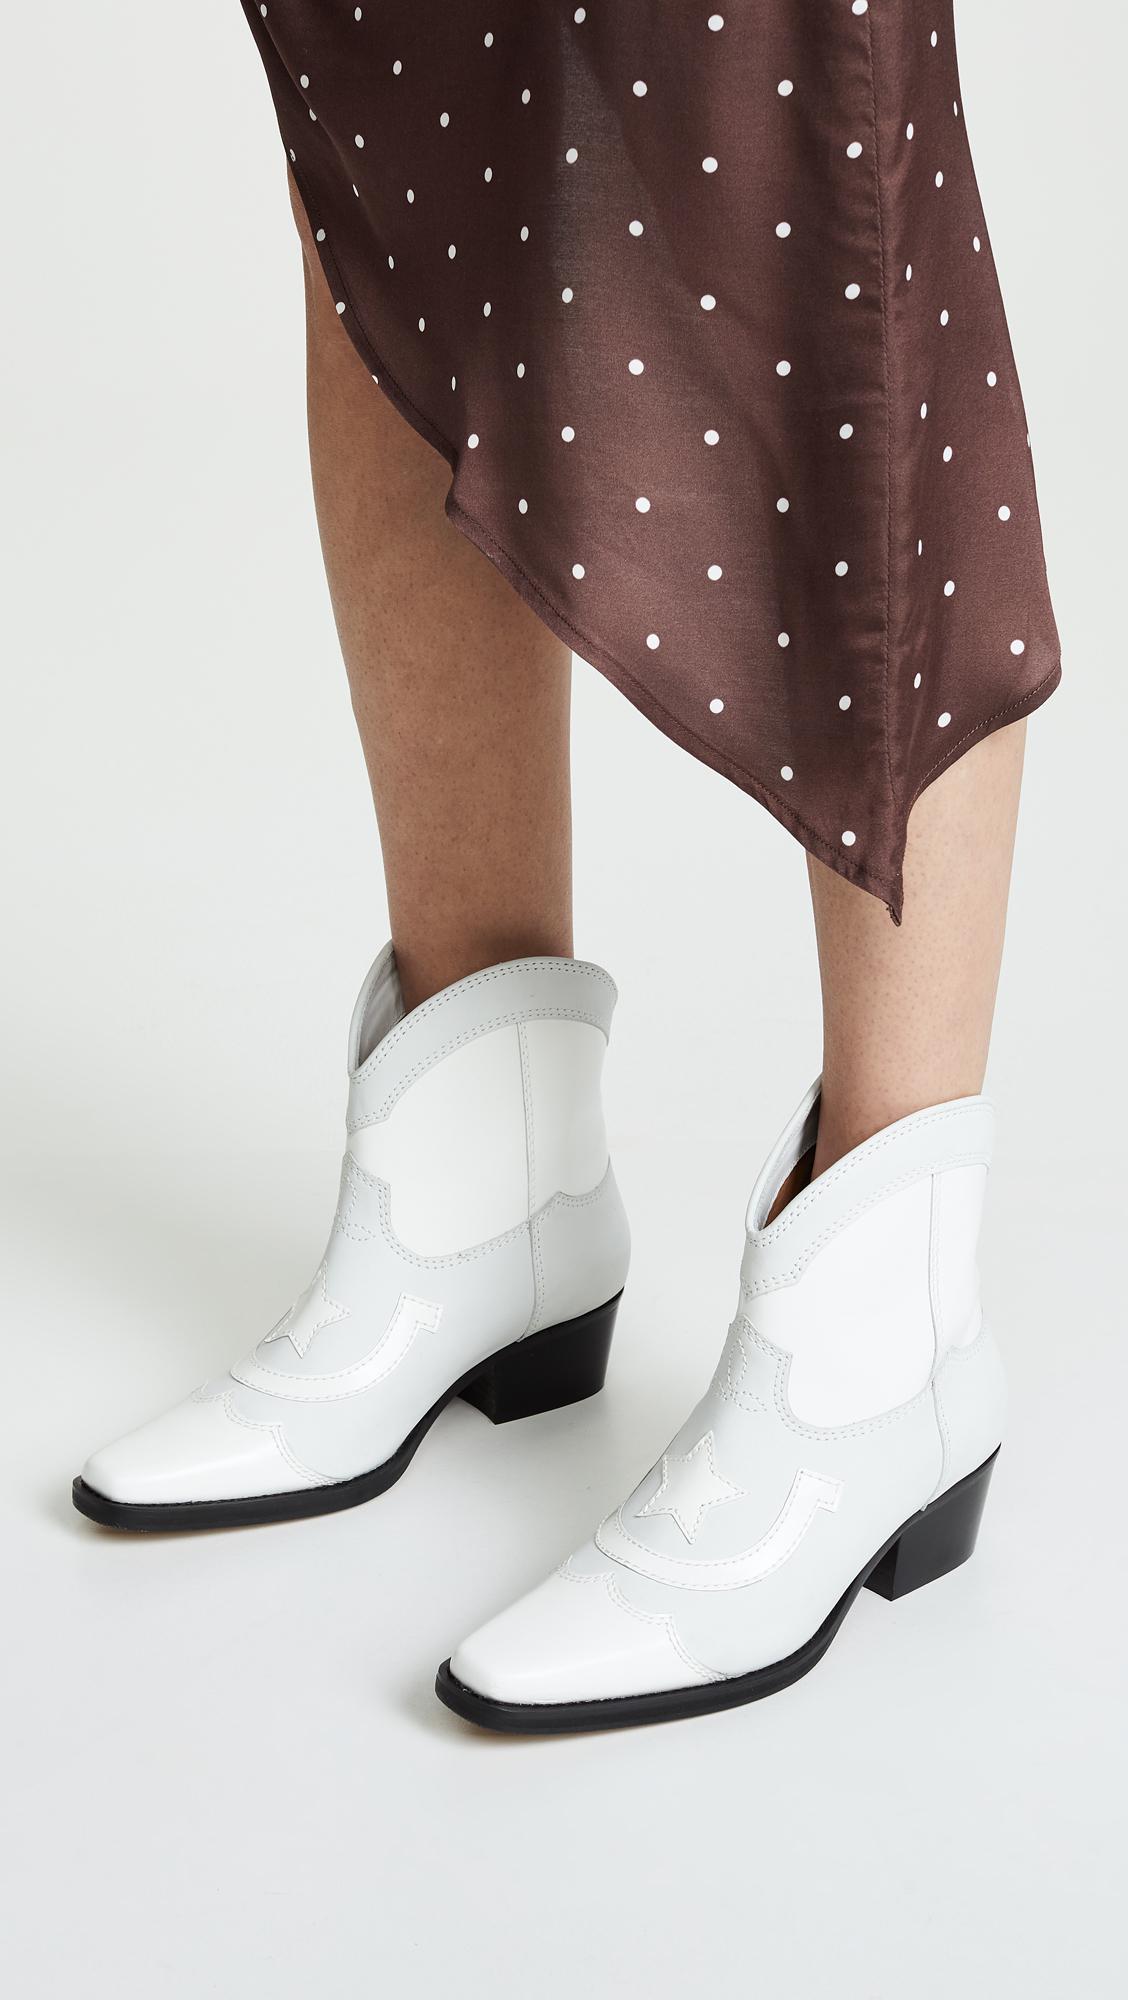 Ganni Low Texas Leather Cowboy Boots in Bright White (White) - Lyst